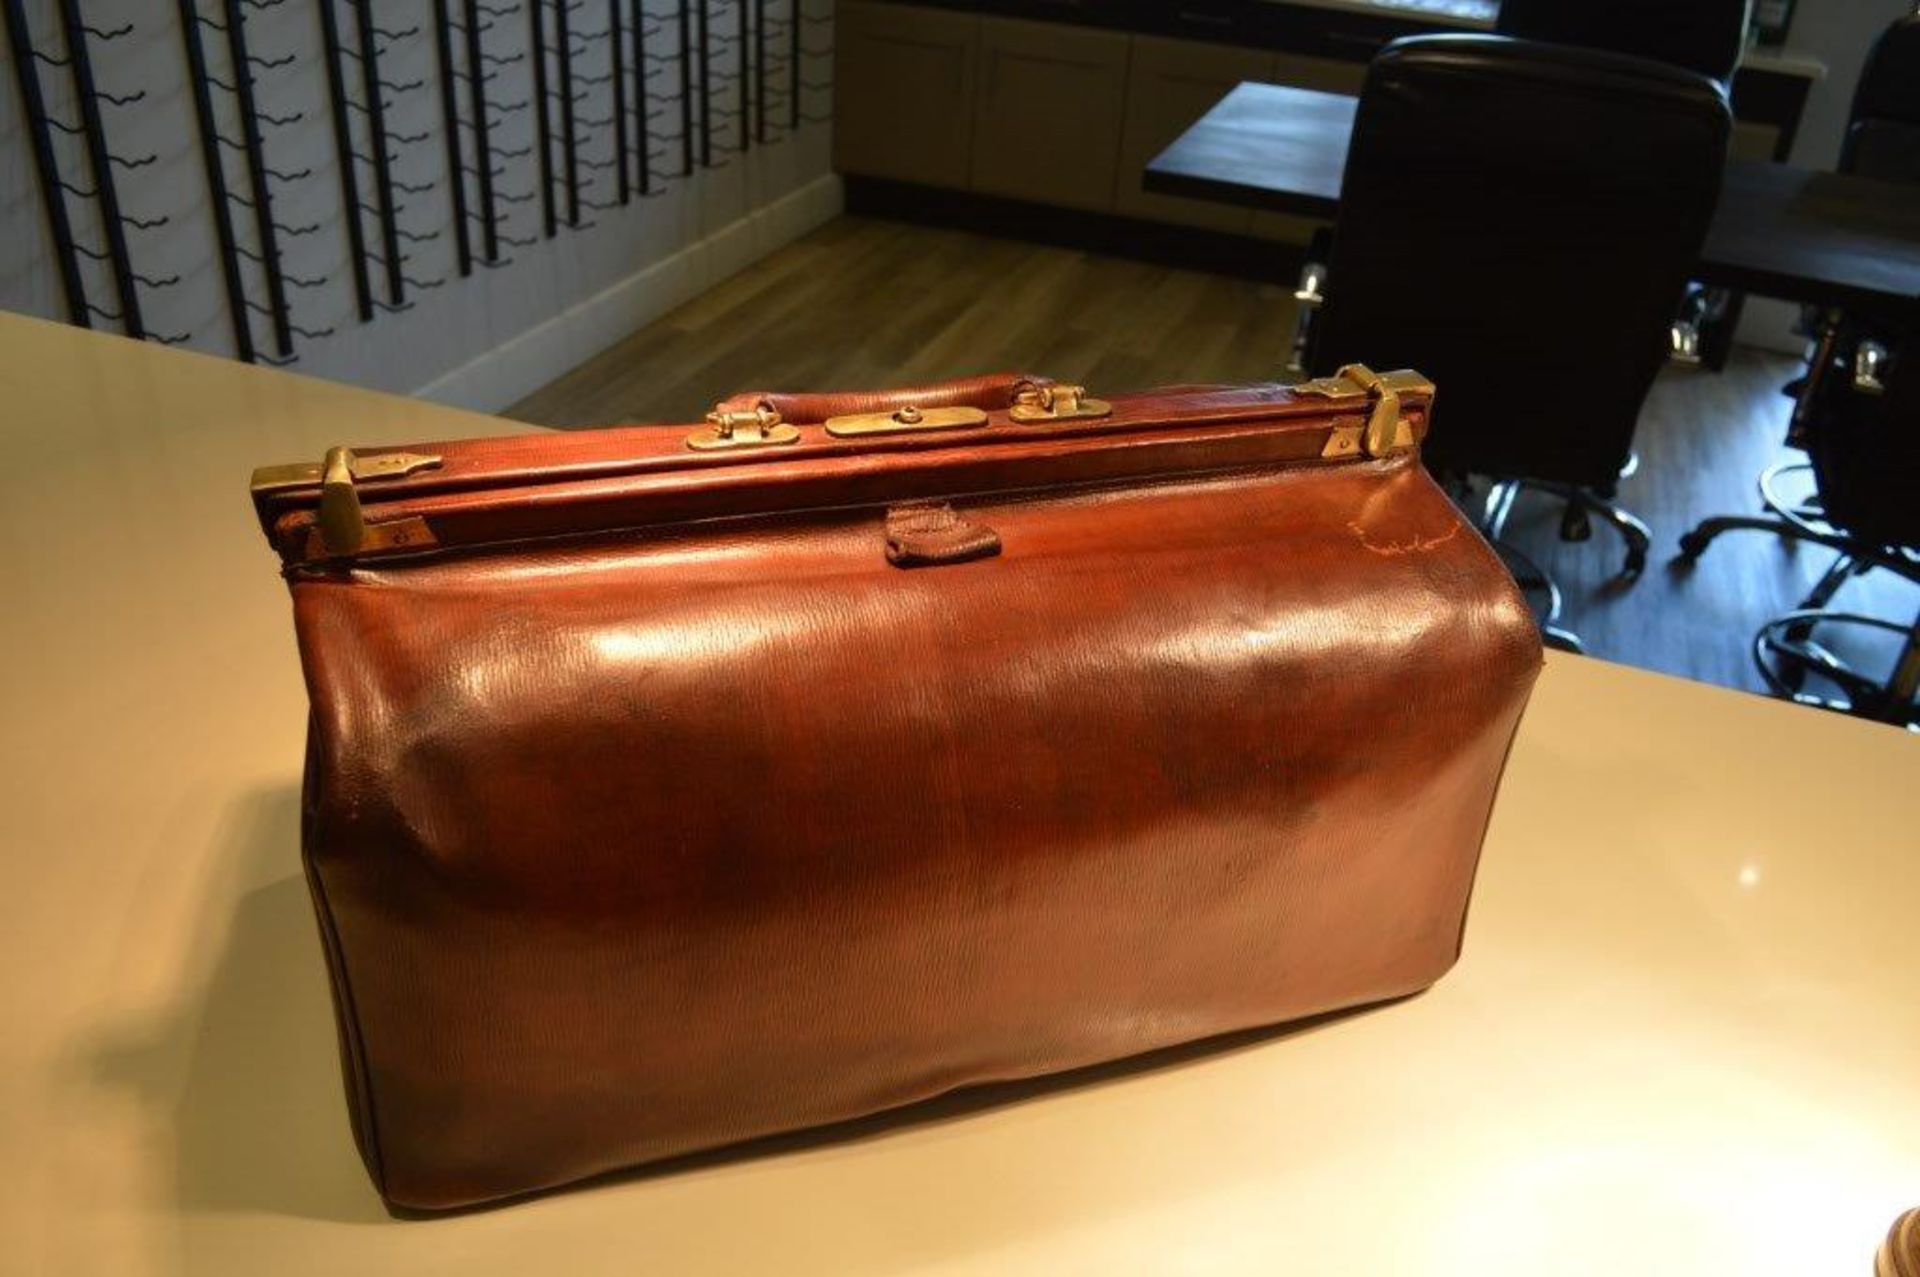 A simply stunning vintage brown leather travel / flight bag.
Believed to be dated in the 1950's